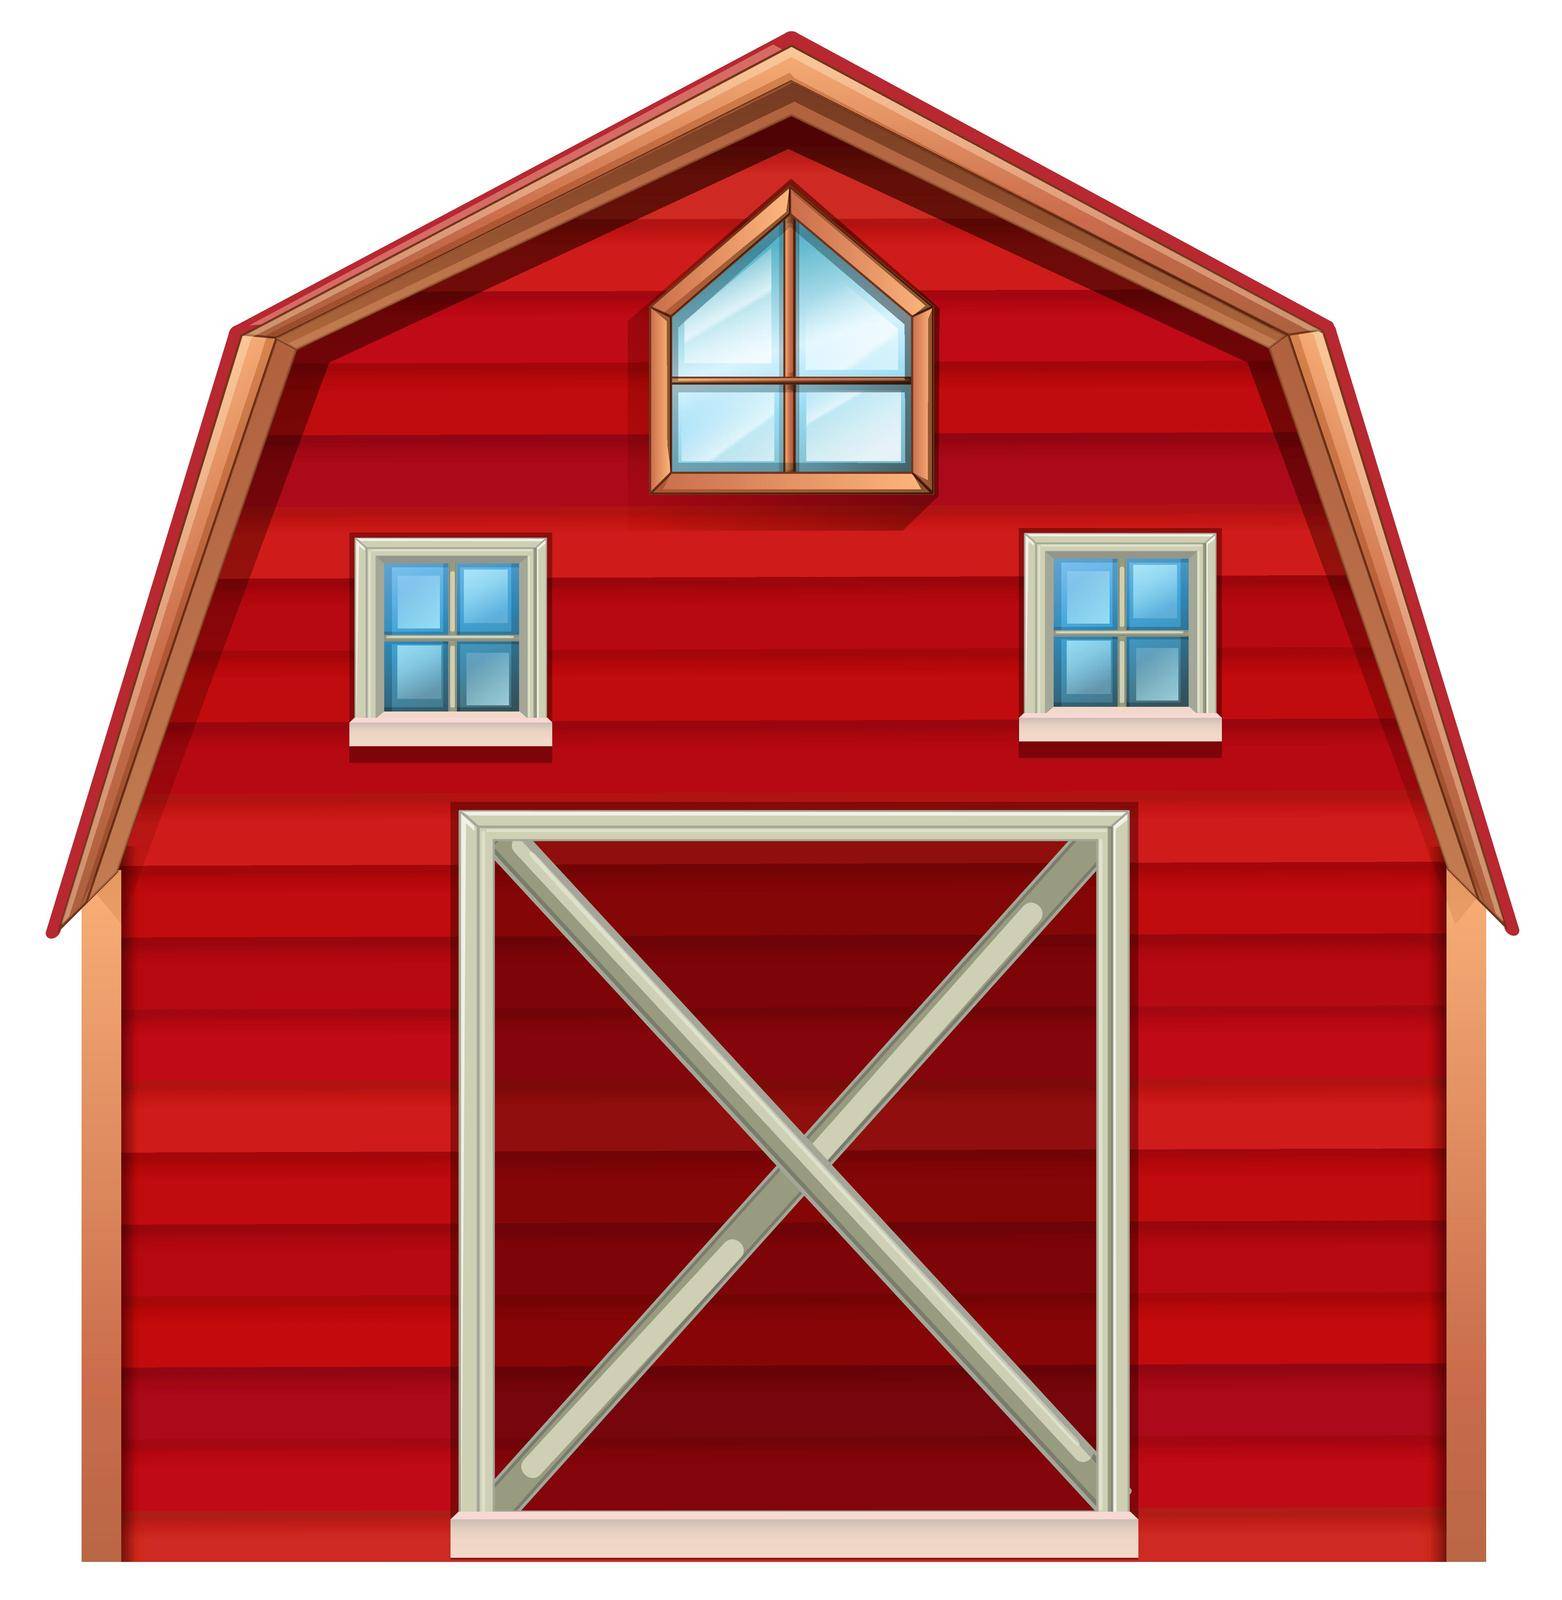 Red wooden barn on a white background